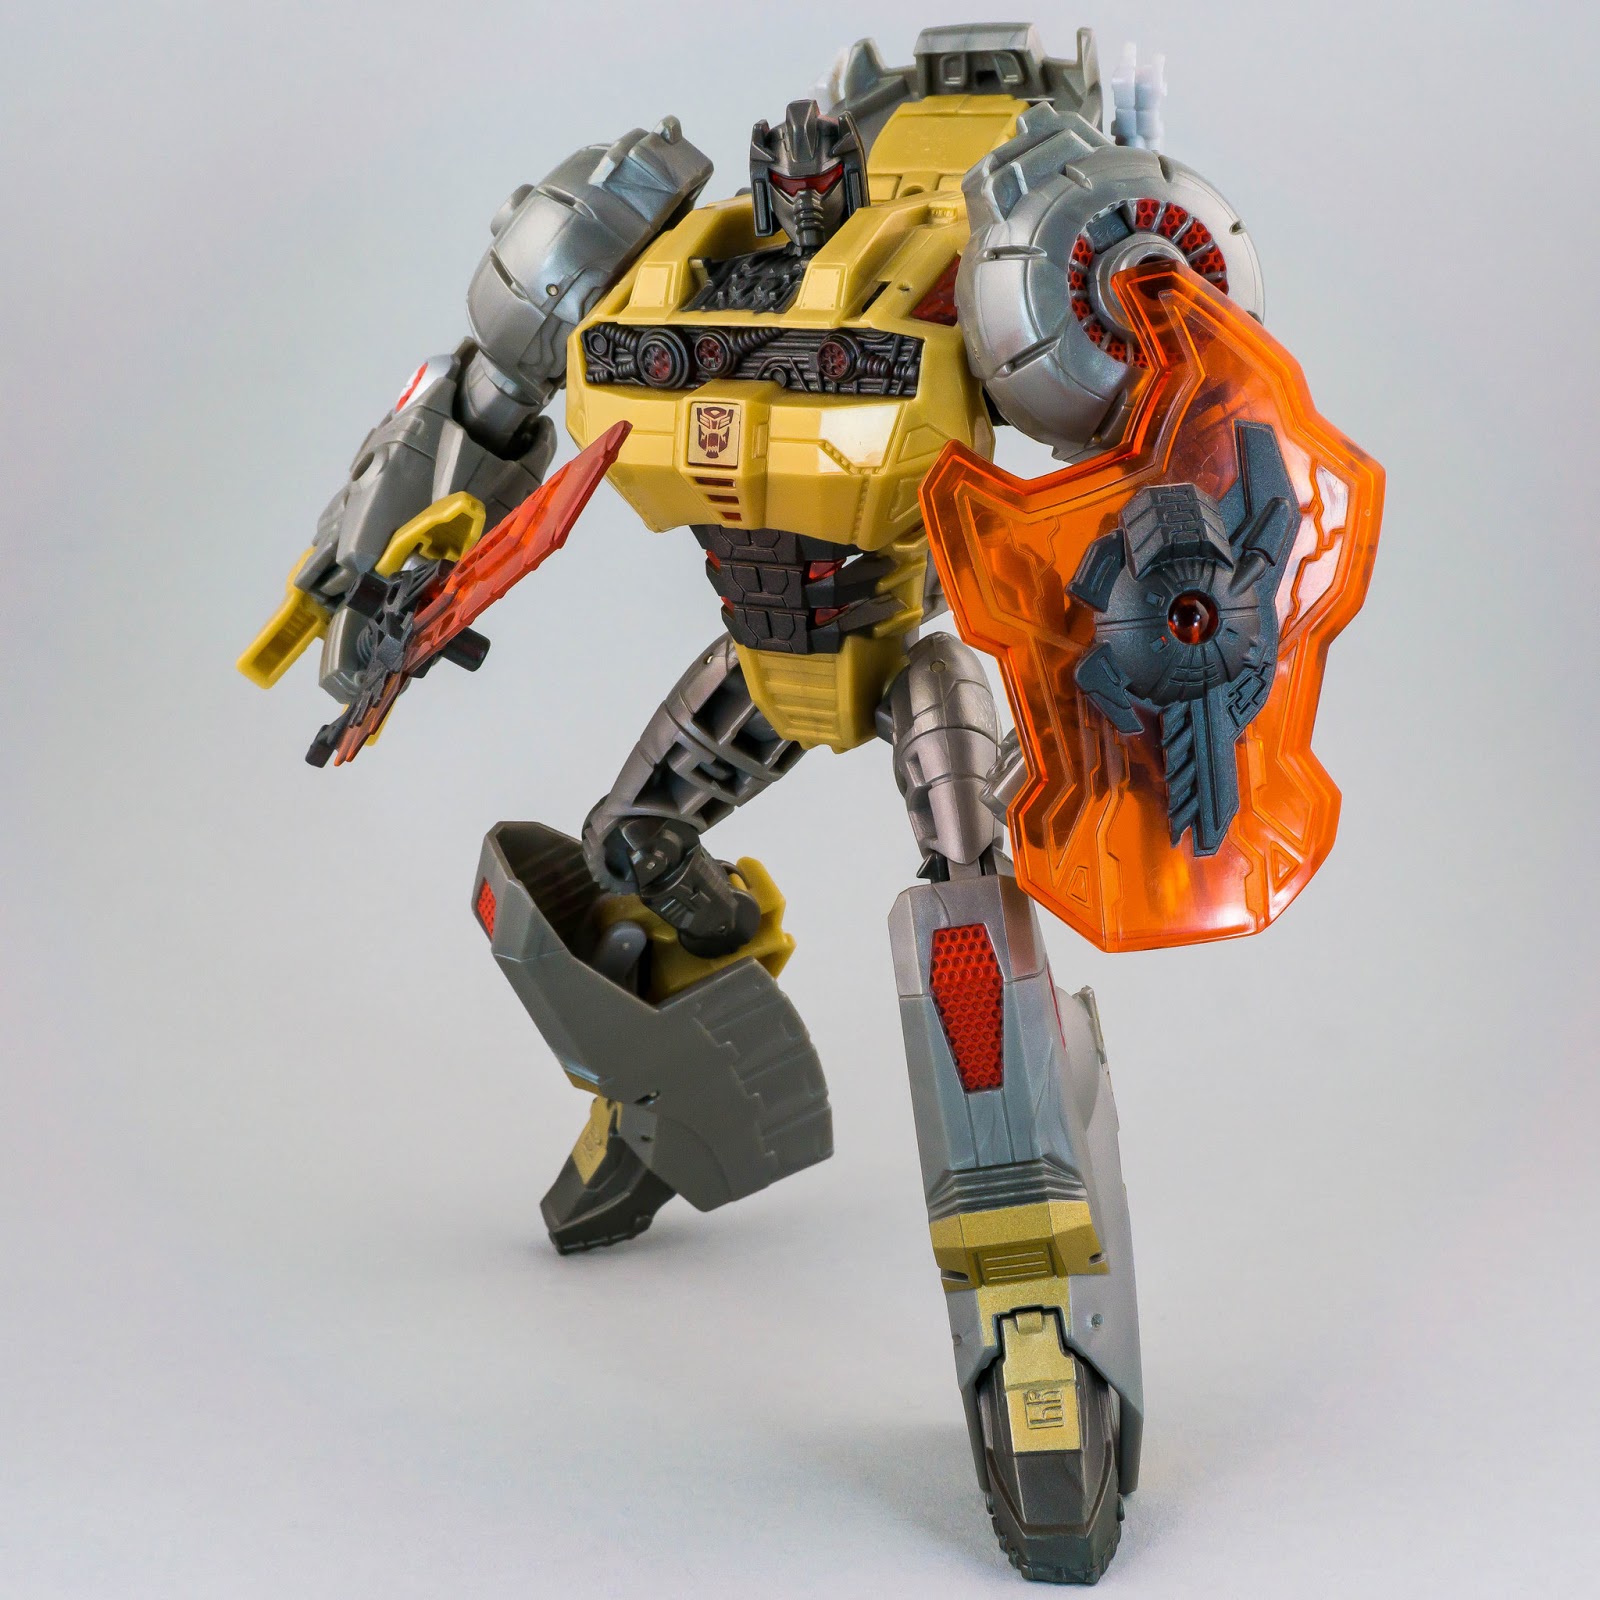 Transformers Generations Grimlock robot mode with sword and shield